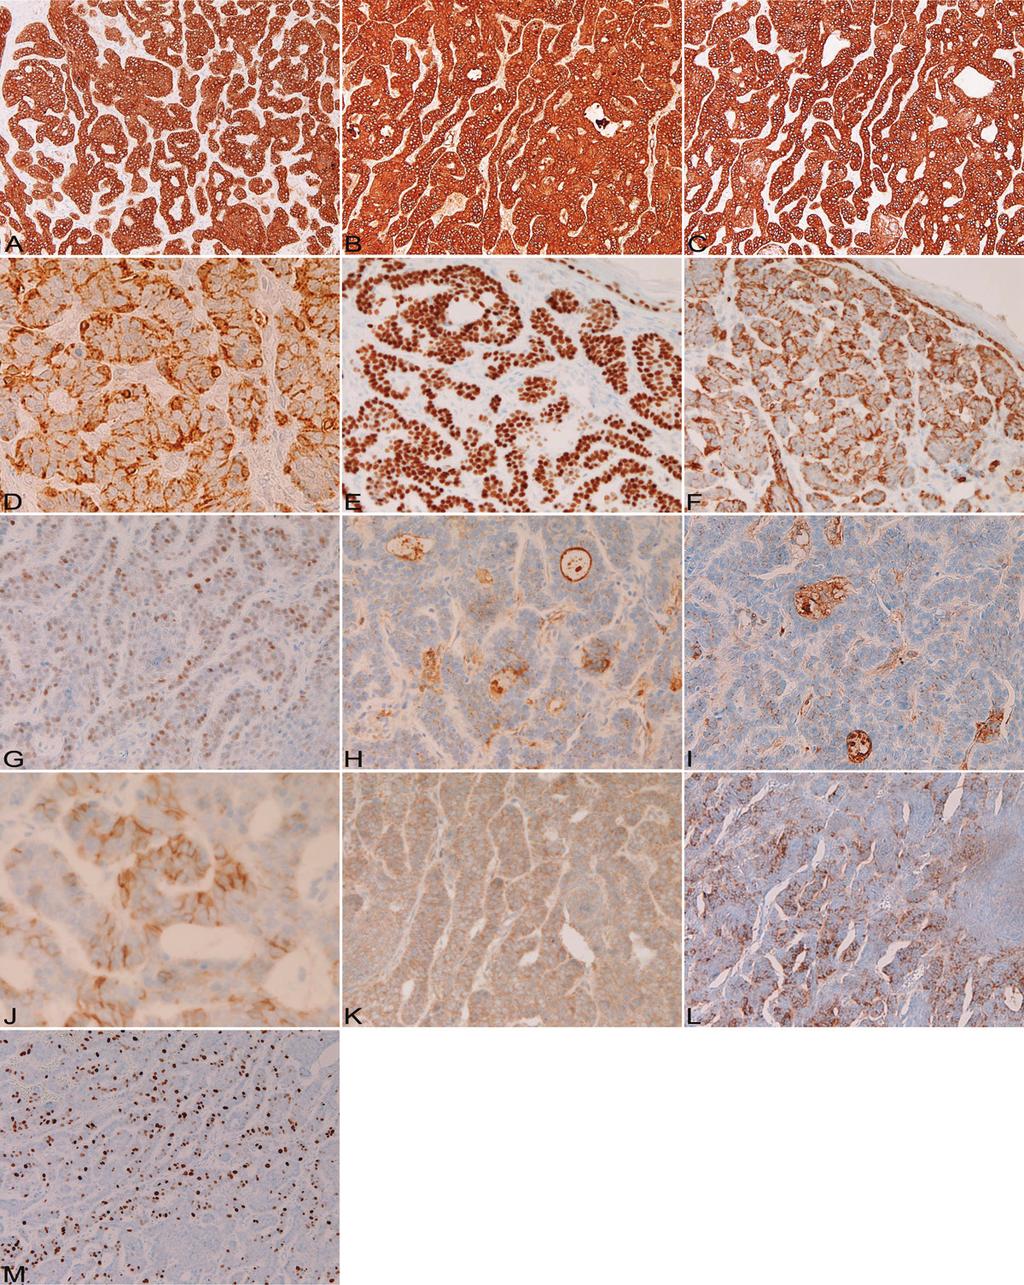 Cutaneous NET Figure 2. Immunohistochemistry. The tumor cells are strongly positive for cytokeratin (CK) 34BE12 (A), CK5/6 (B), CK14 (C), NCAM (CD56) (D), p63 (E), and KIT (CD117) (F).